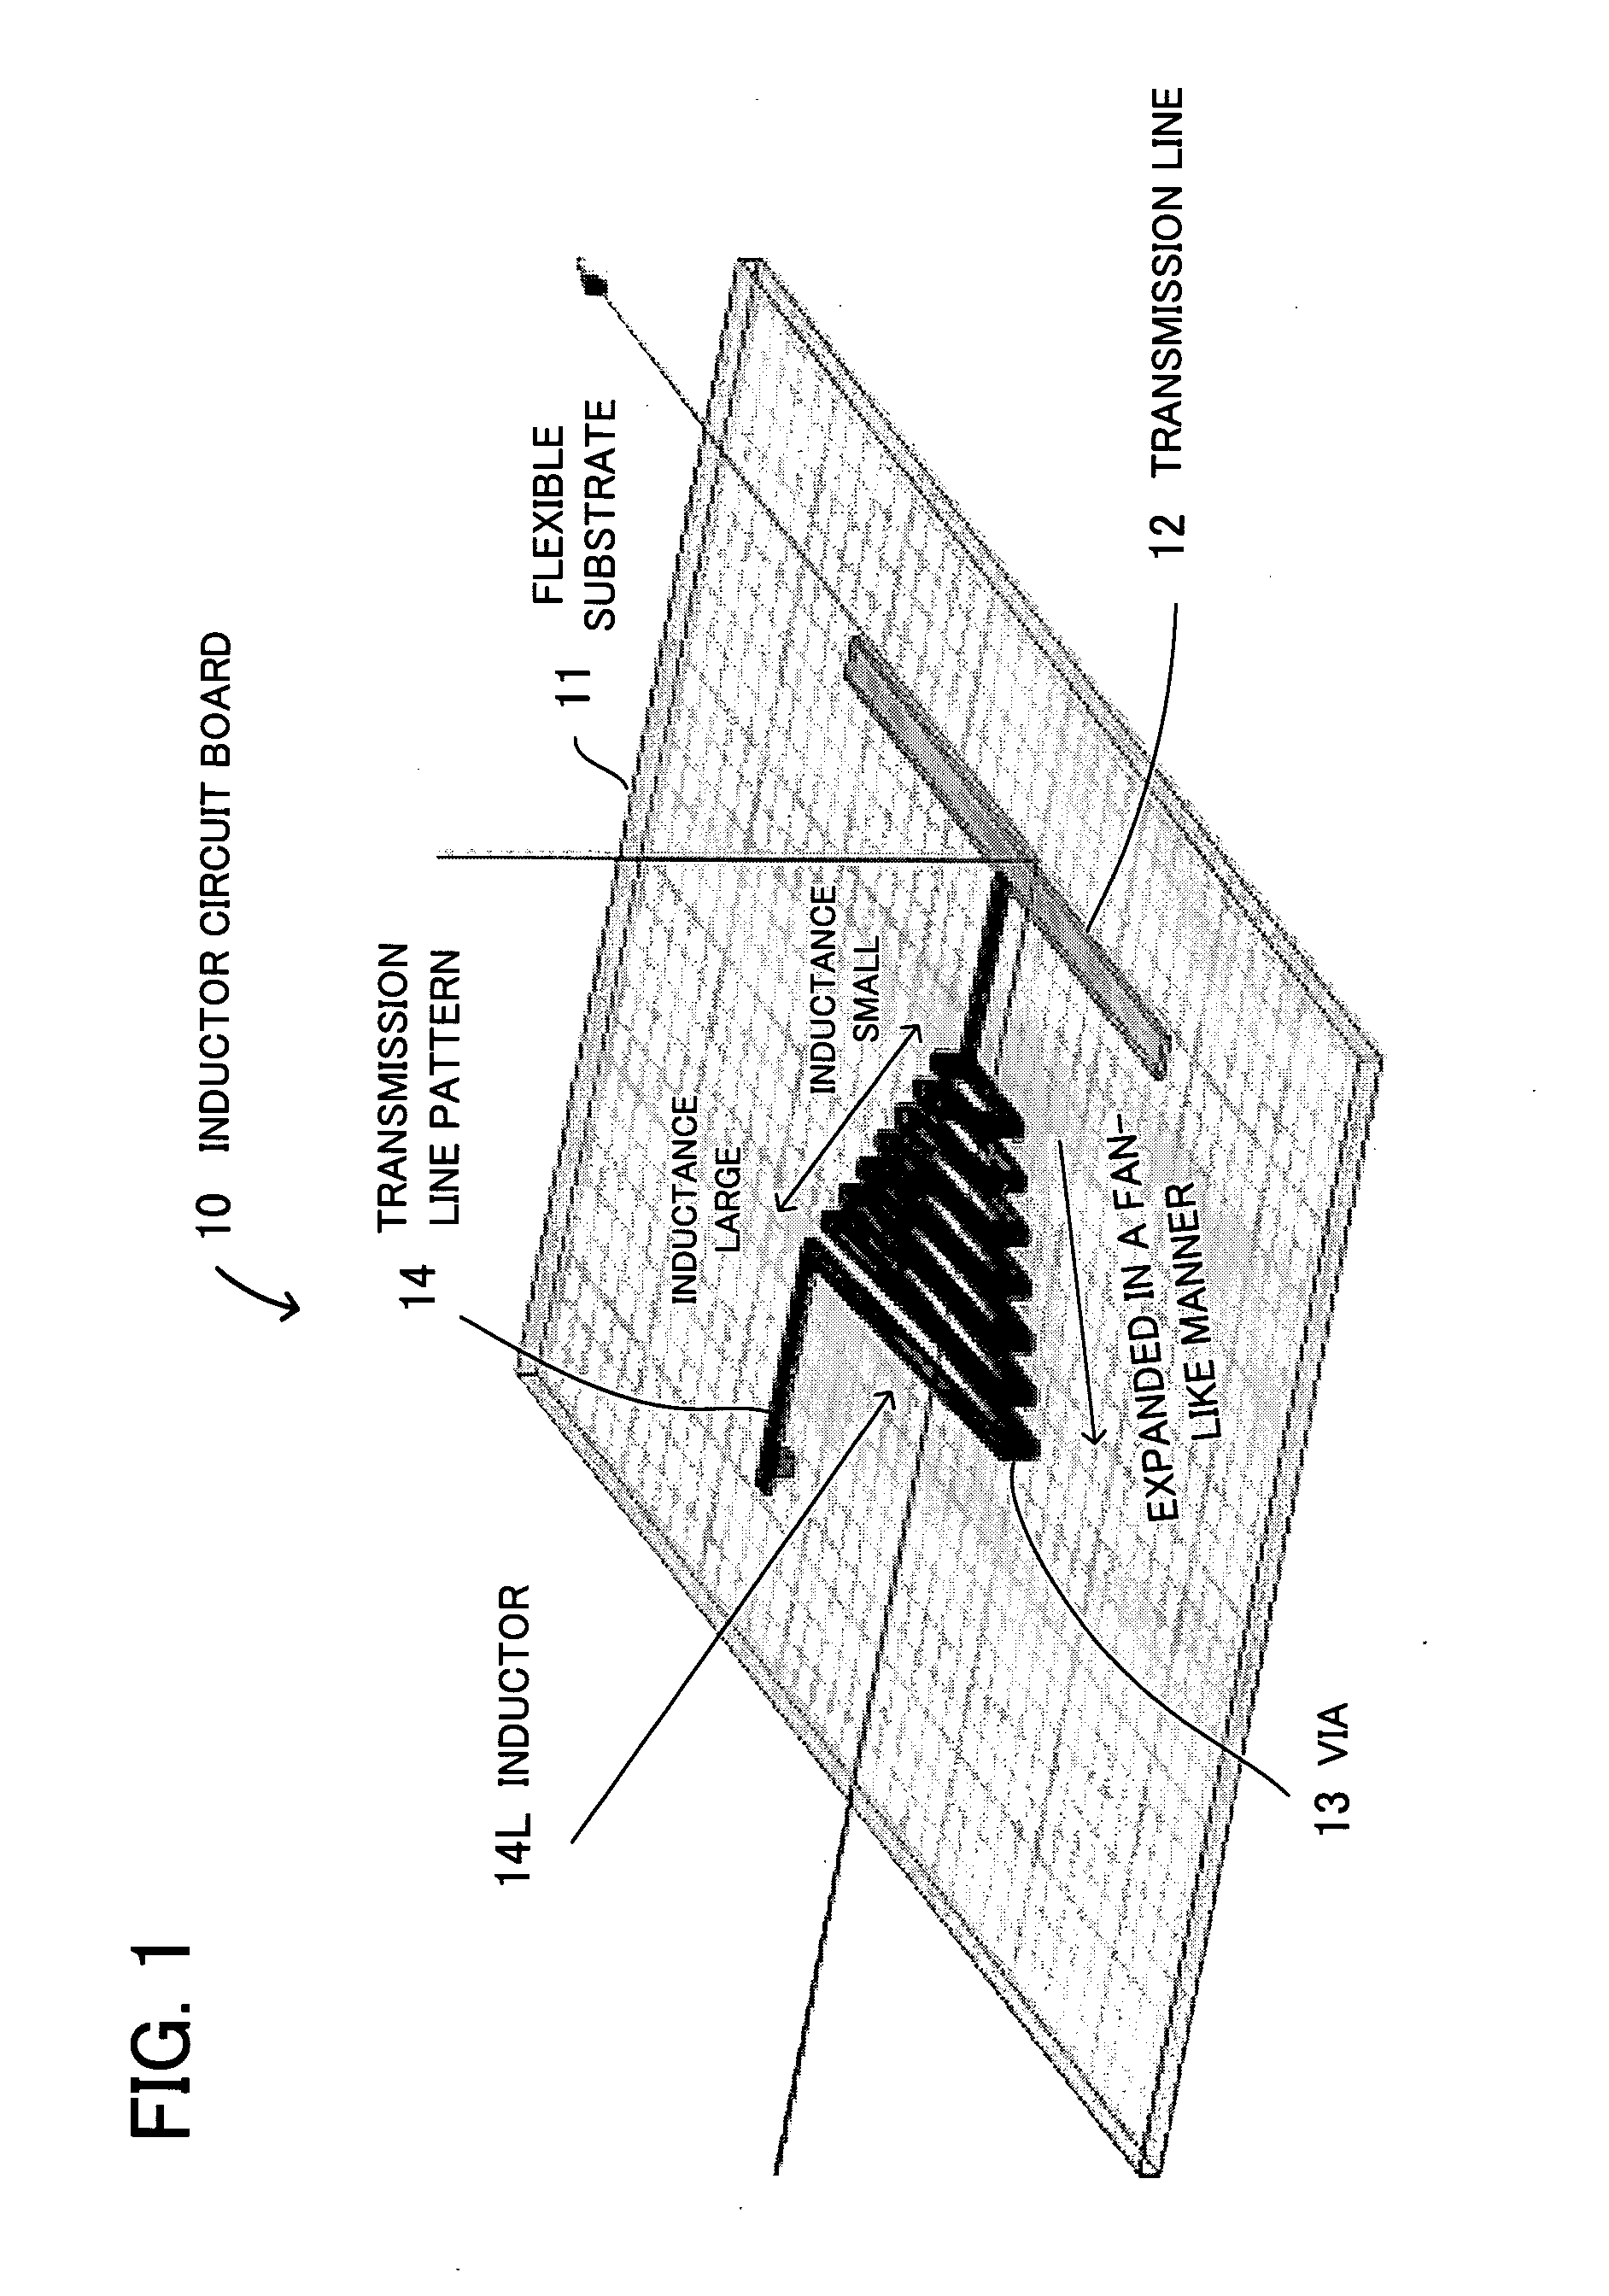 Inductor circuit board, method of forming inductor, and bias-T circuit